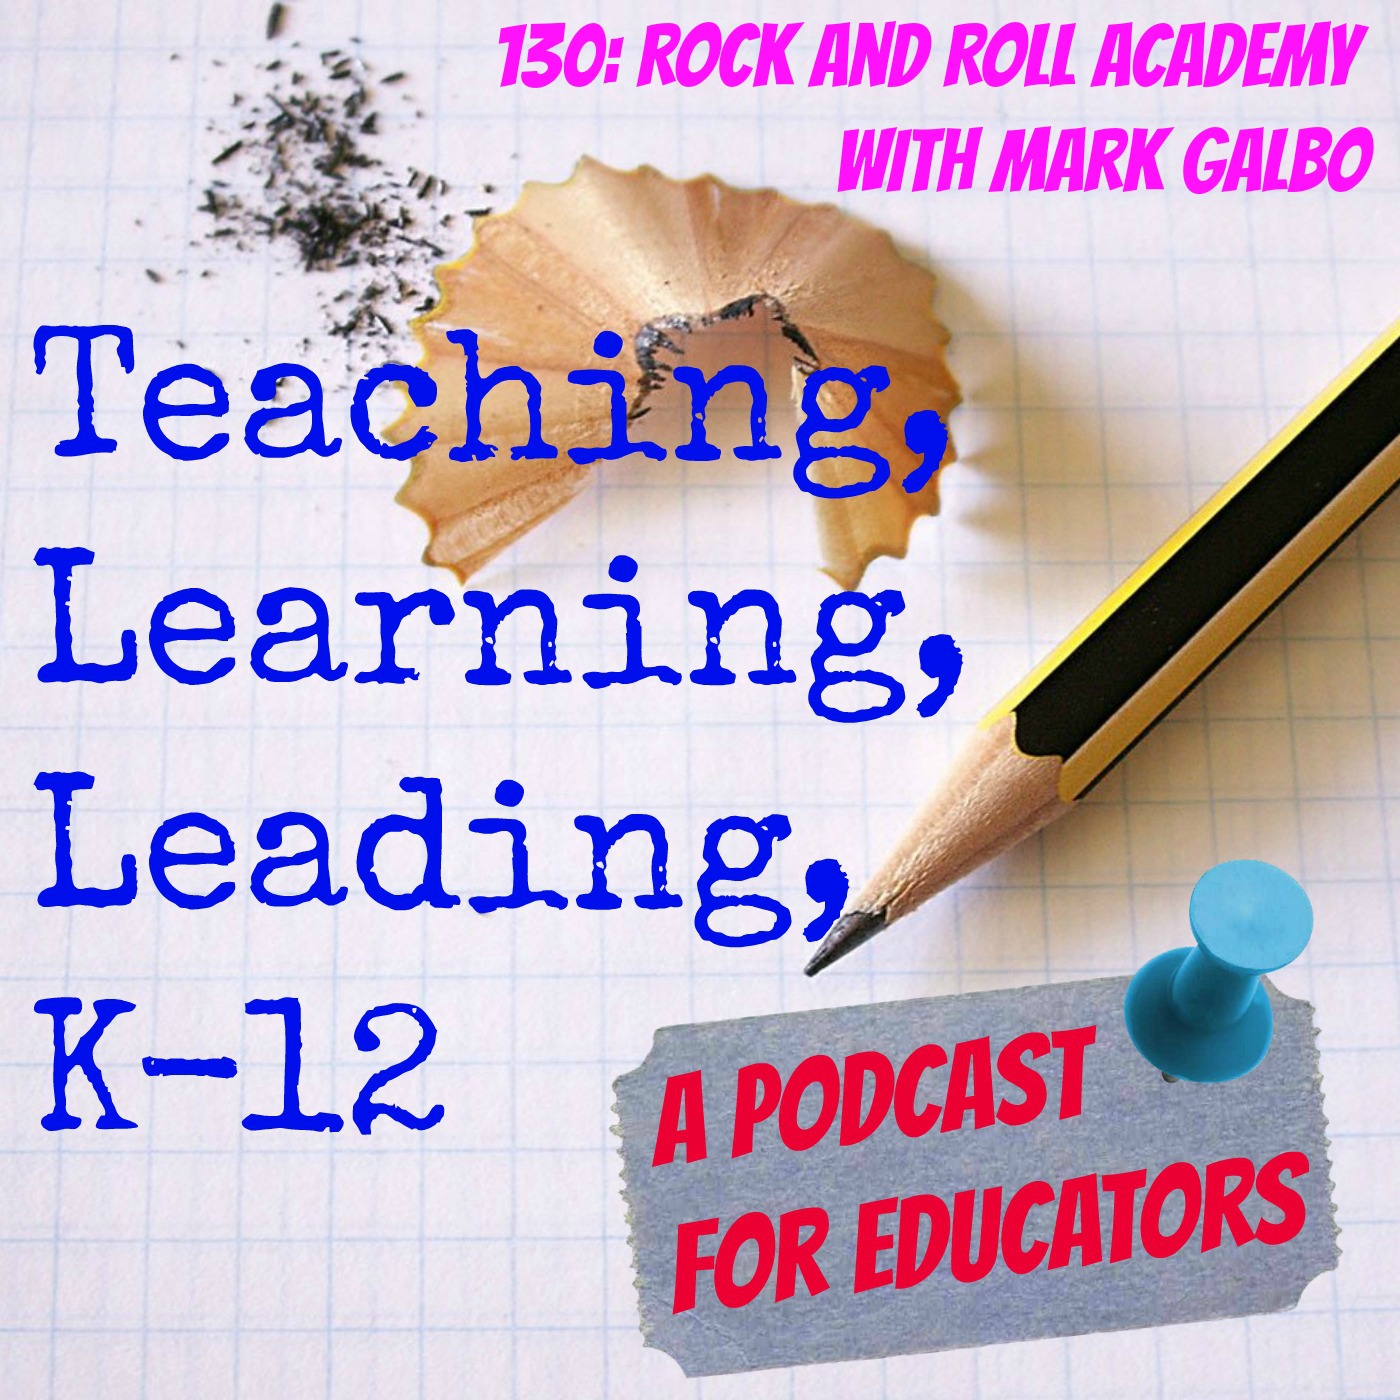 130: Rock and Roll Academy with Mark Galbo Image